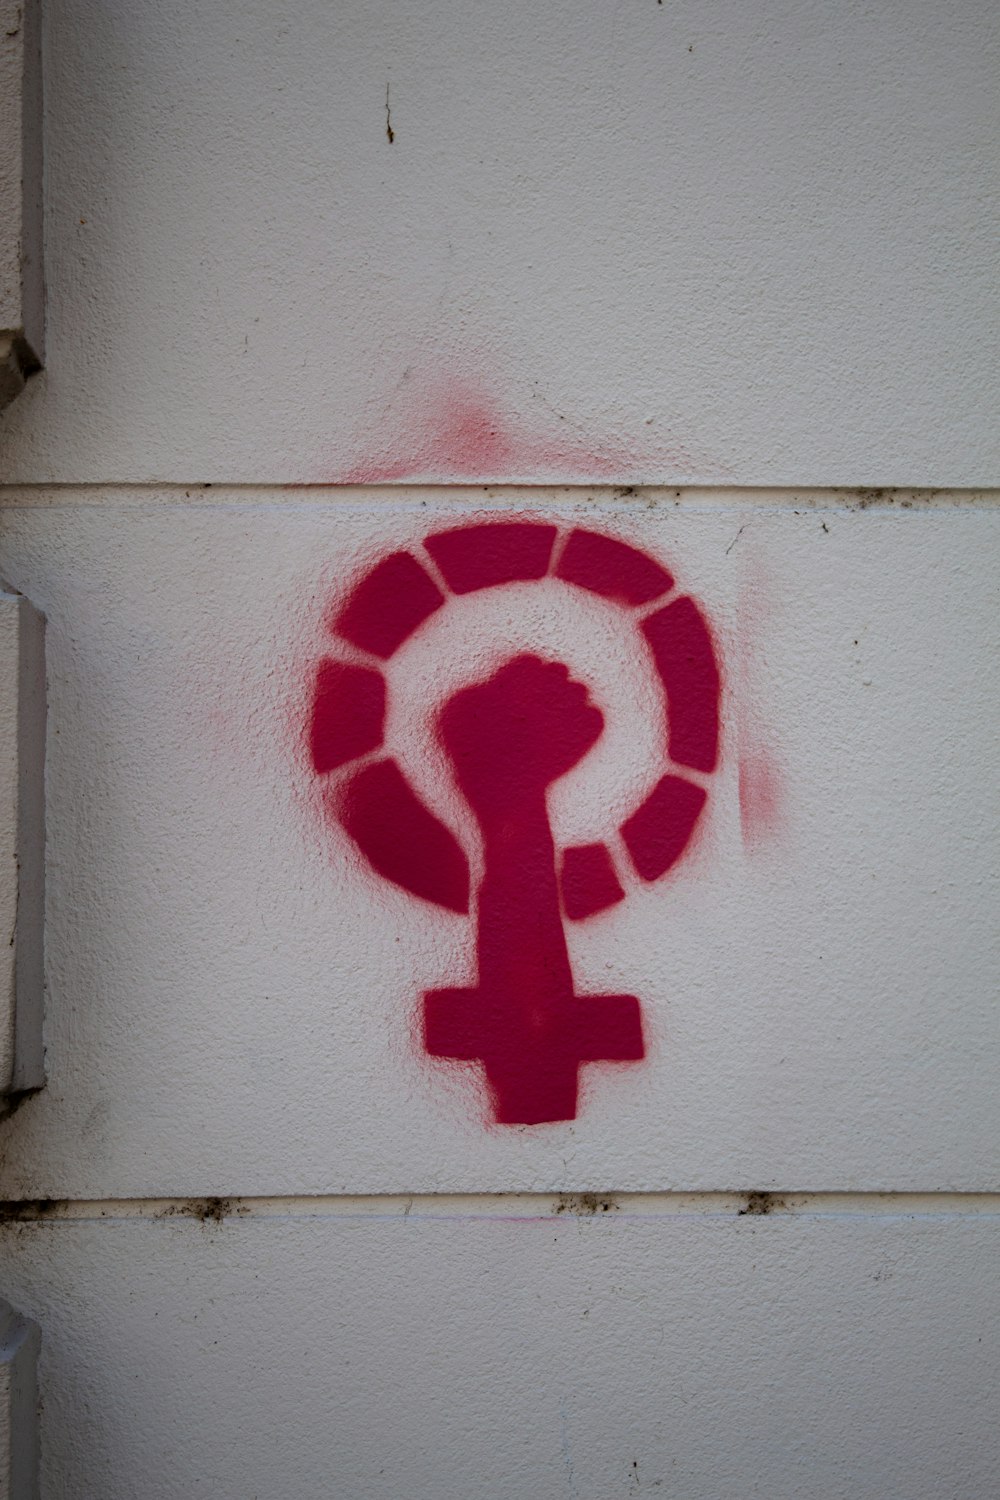 a red question mark on a white wall